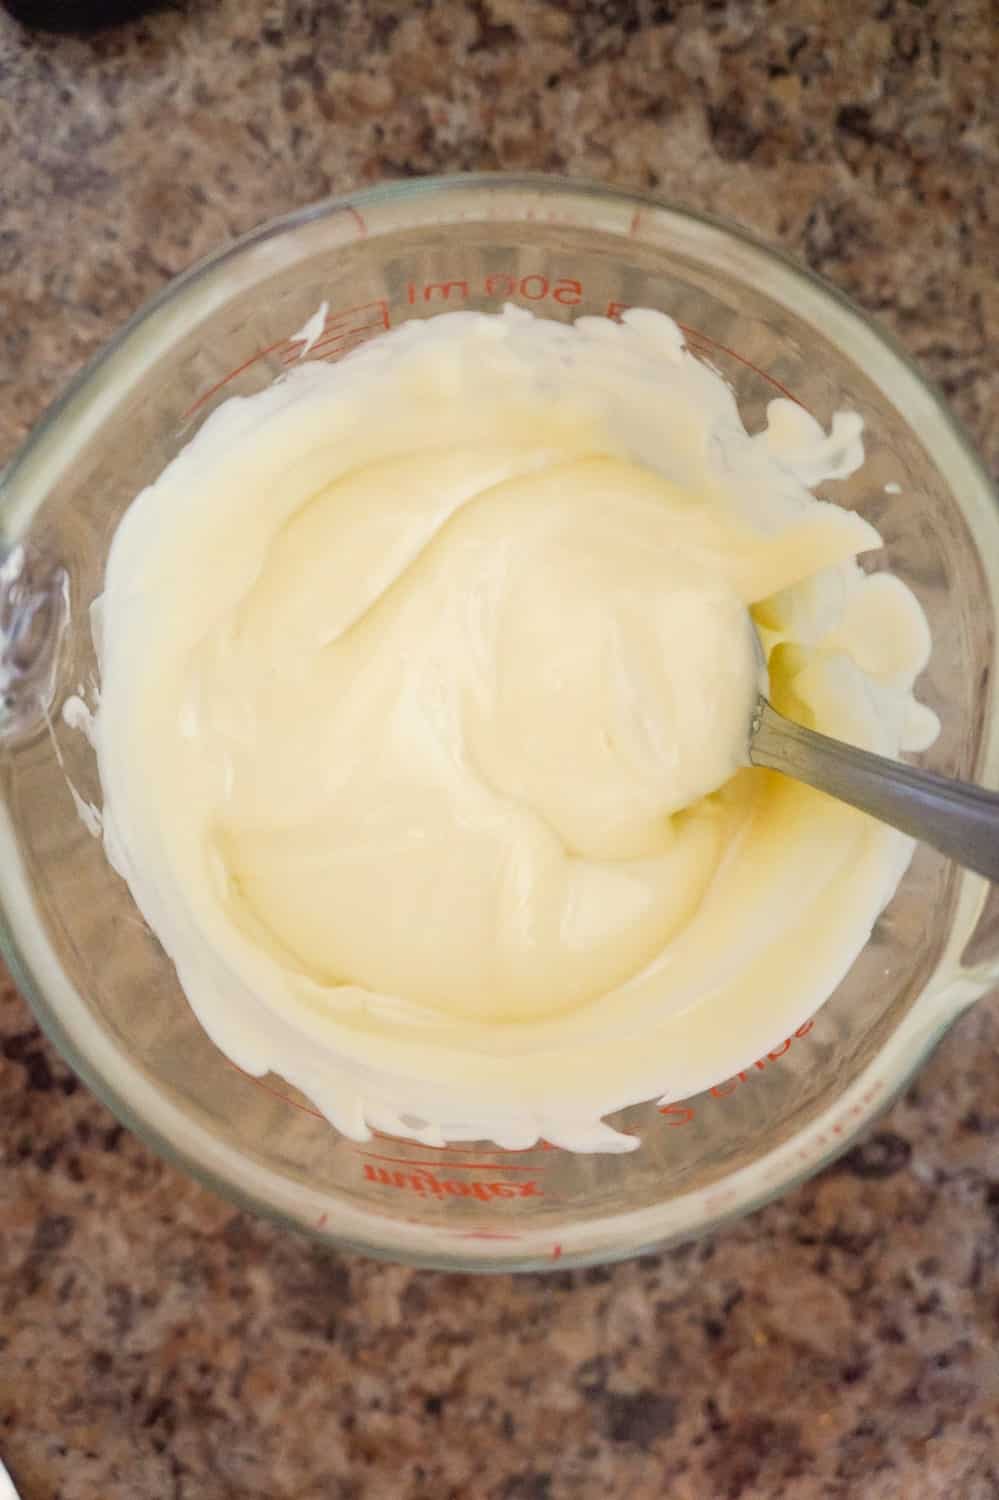 melted white chocolate in a glass measuring cup